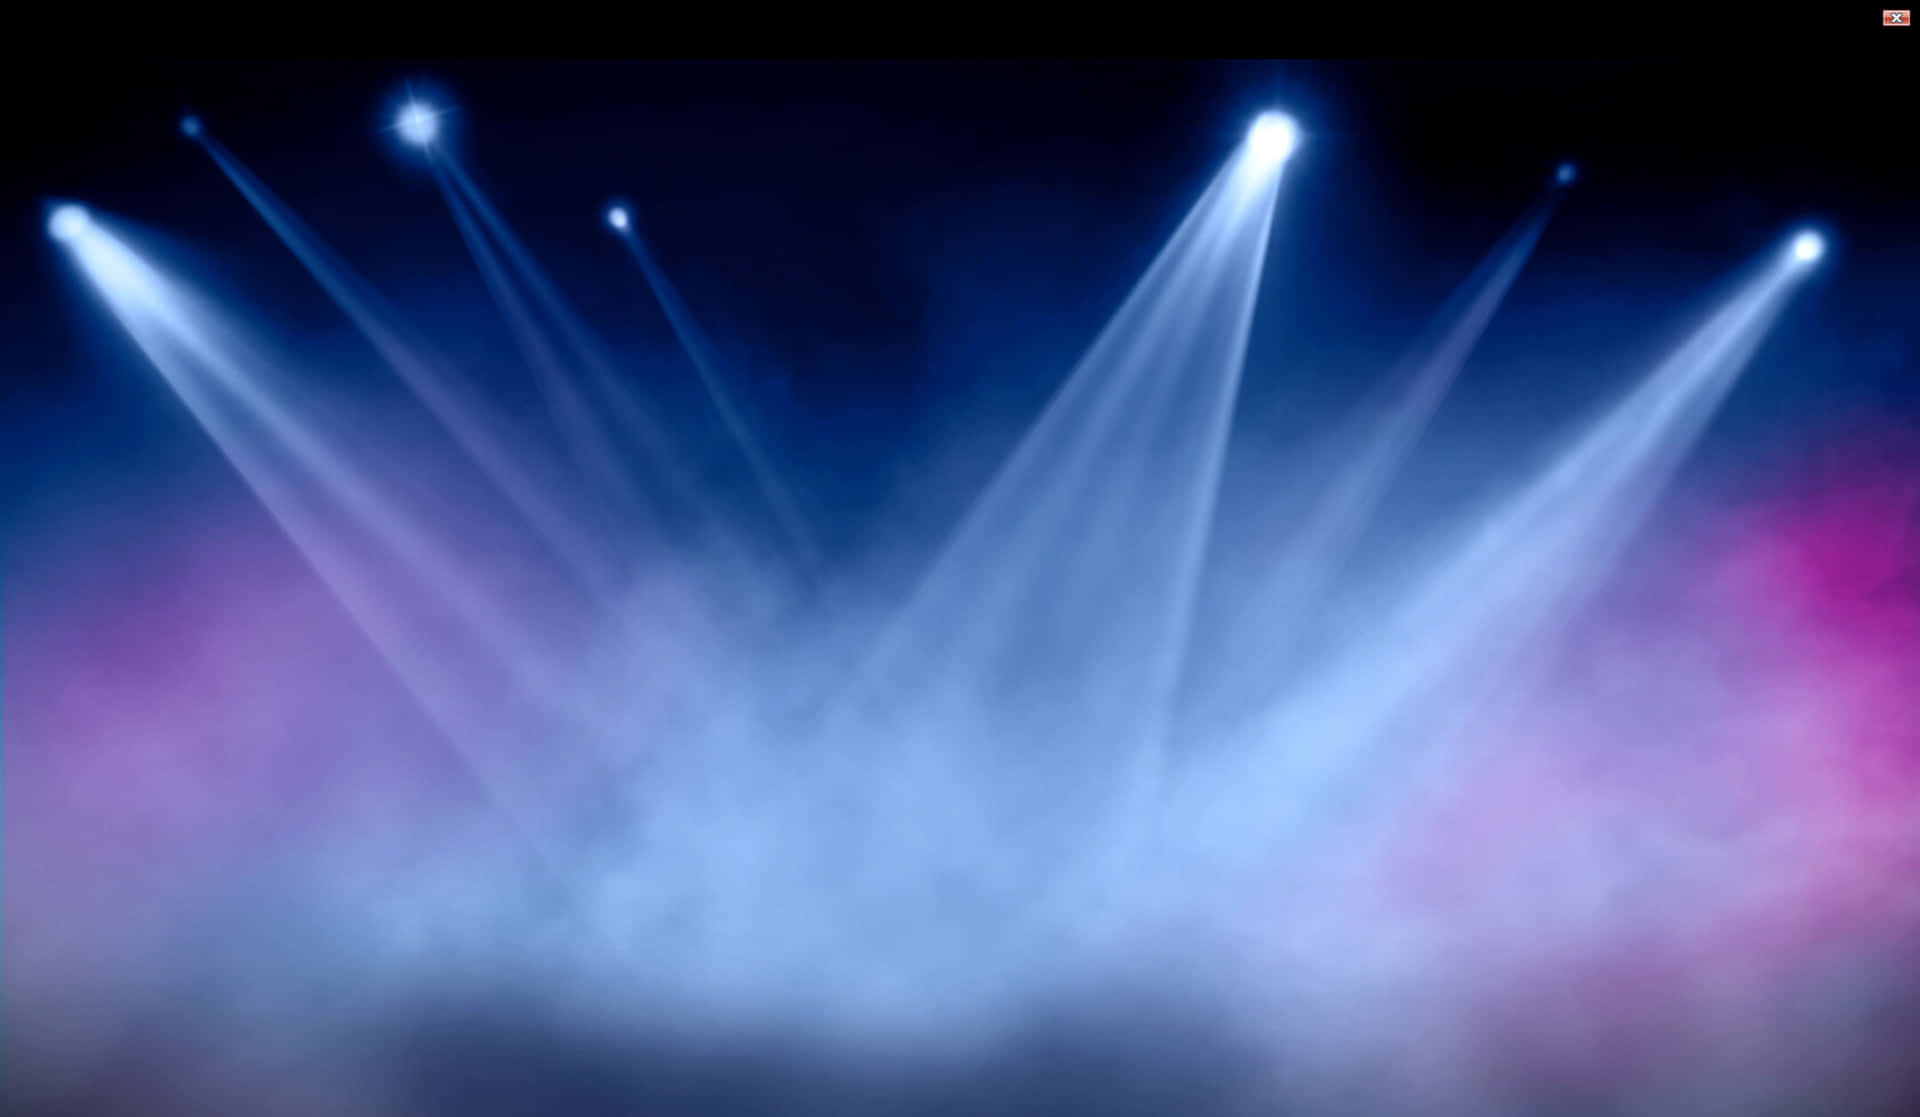 A Stage With Light Beams On The Stage